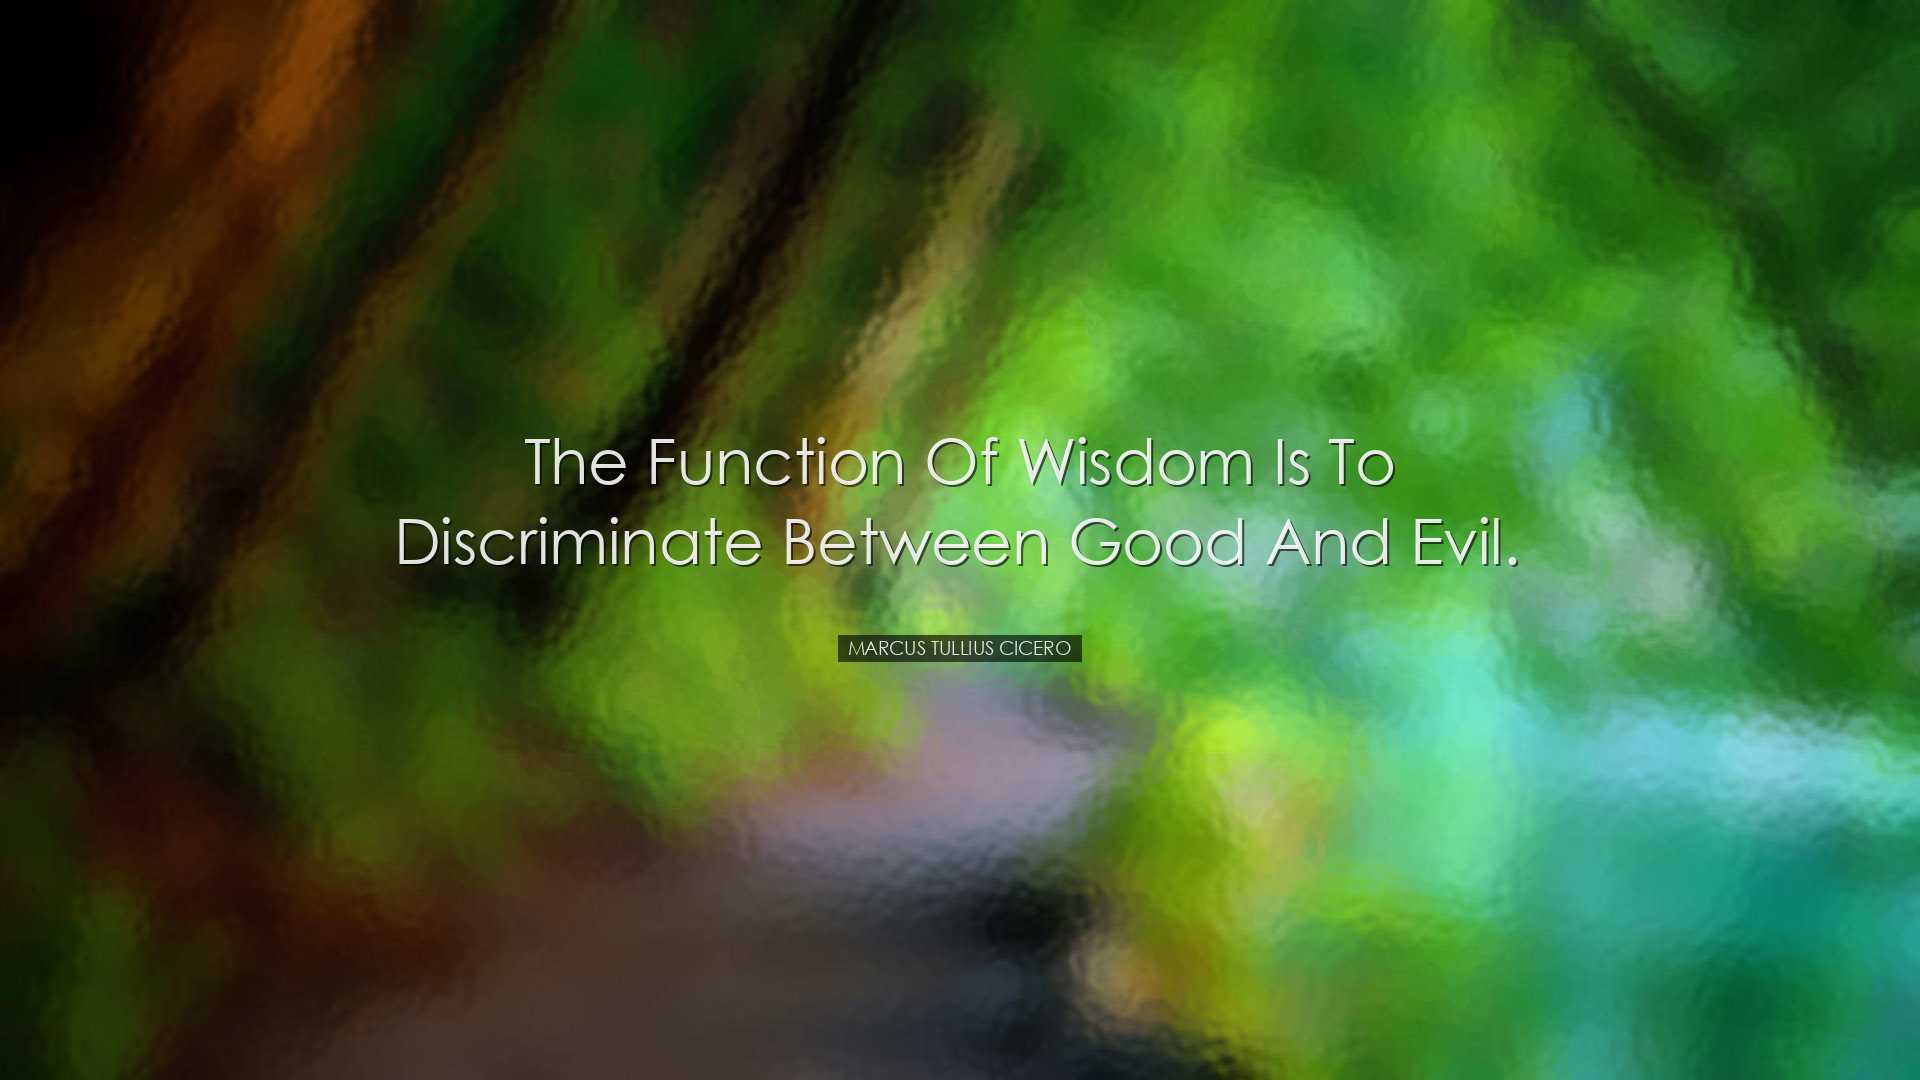 The function of wisdom is to discriminate between good and evil. -